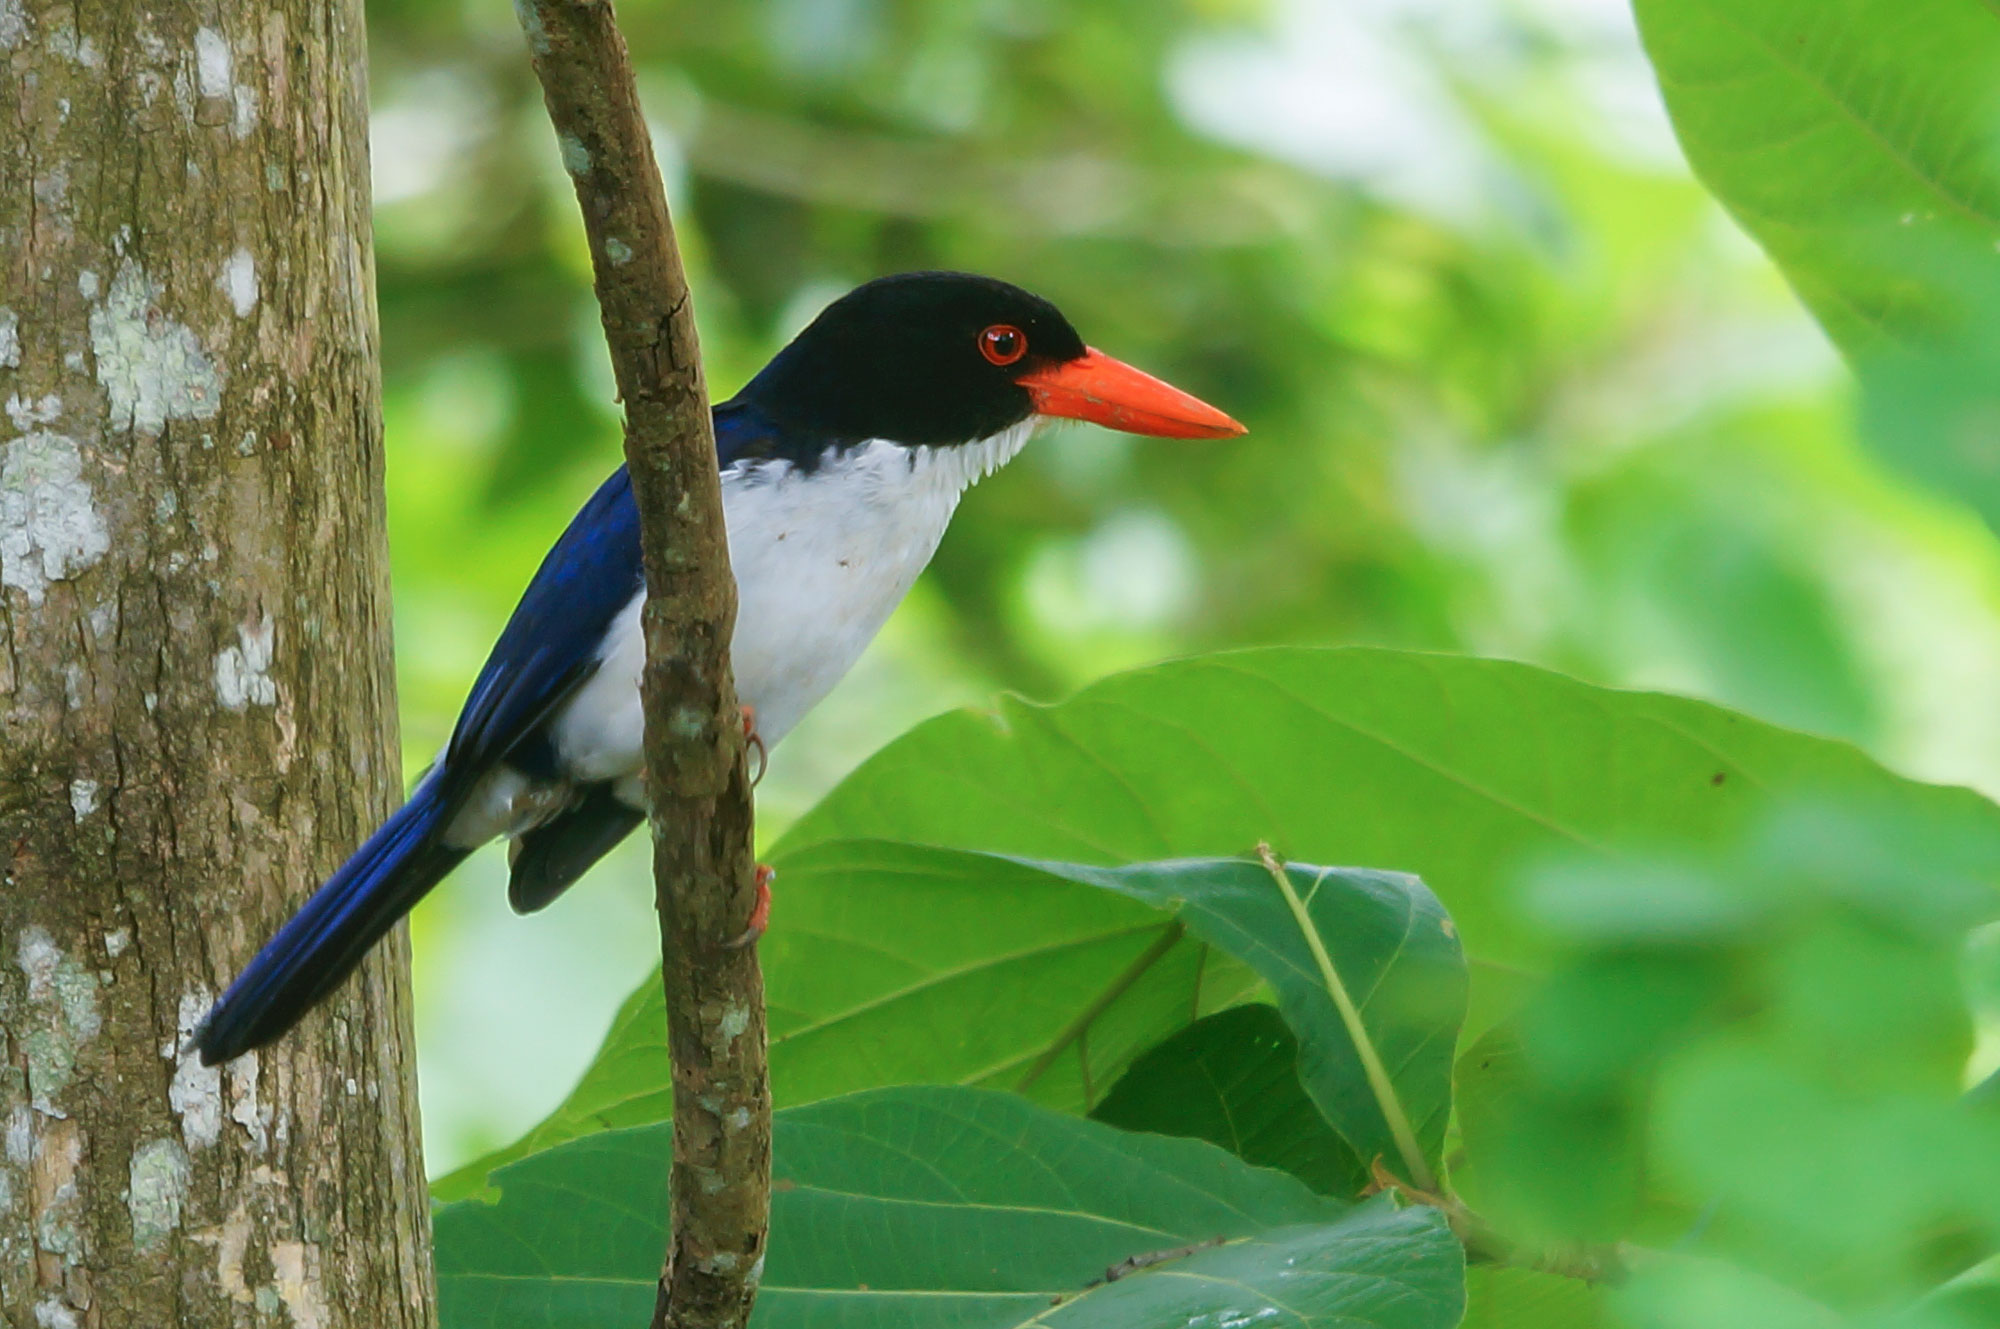 Photograph of a white-rumped kingfisher sitting on a branch. The photo shows a bird with a black head, a white breast, and blue wings and a blue tail. It has a red eye and an orange beak.